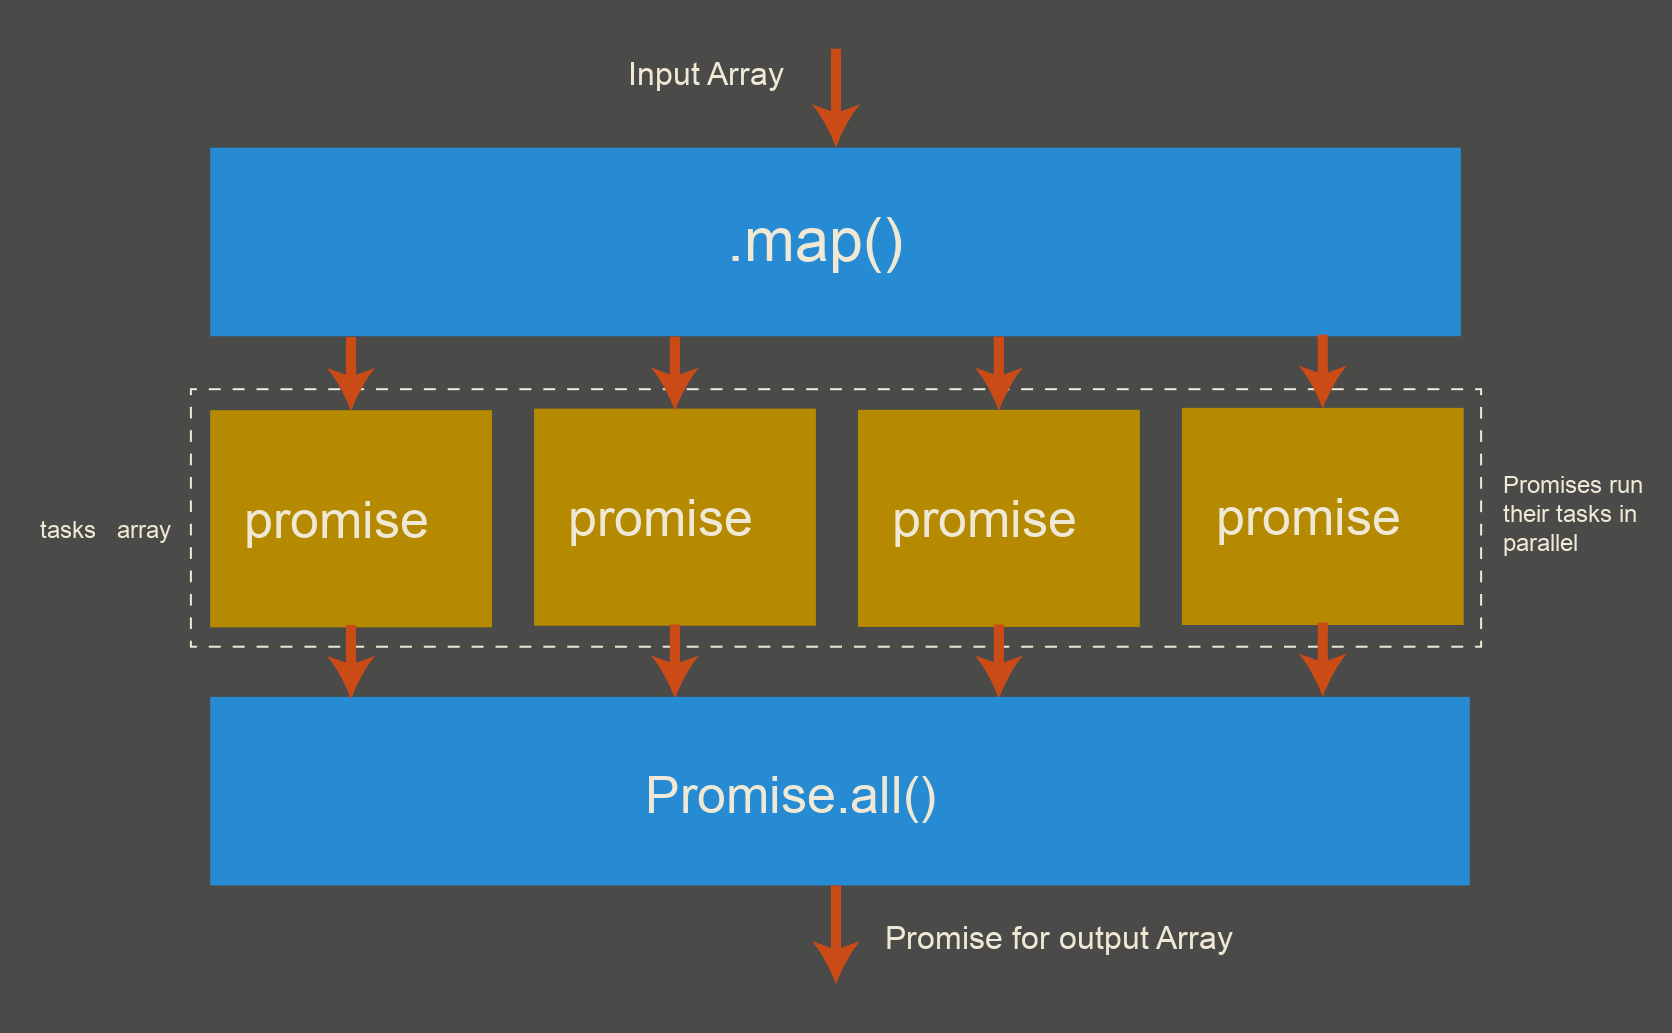 Flow diagram showing .map() running promises in parallel, then Promise.all() collecting them back up again.